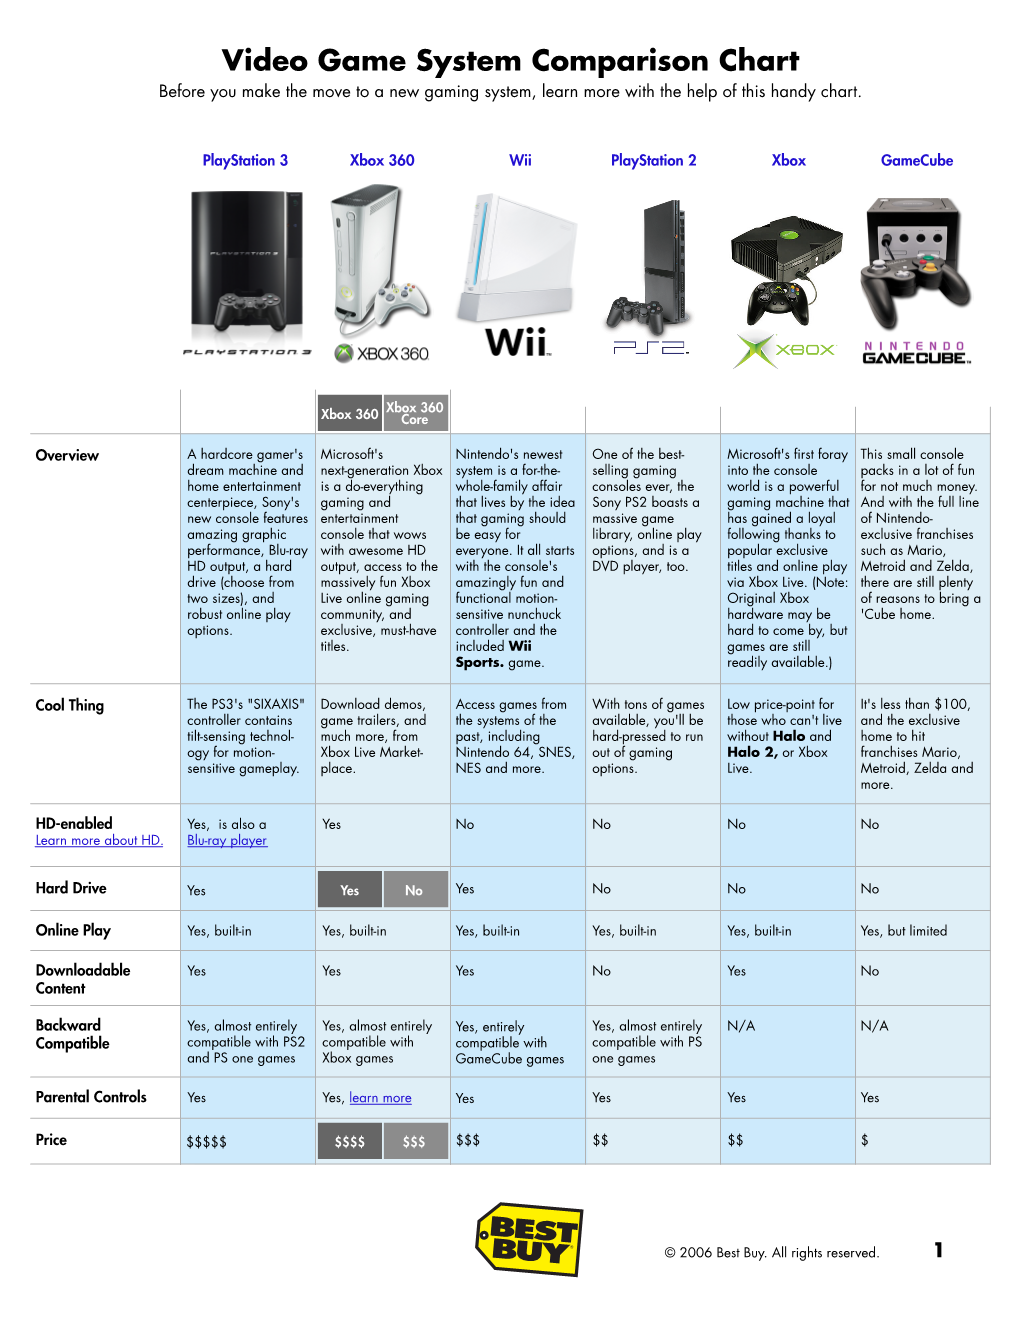 Video Game System Comparison Chart Before You Make the Move to a New Gaming System, Learn More with the Help of This Handy Chart